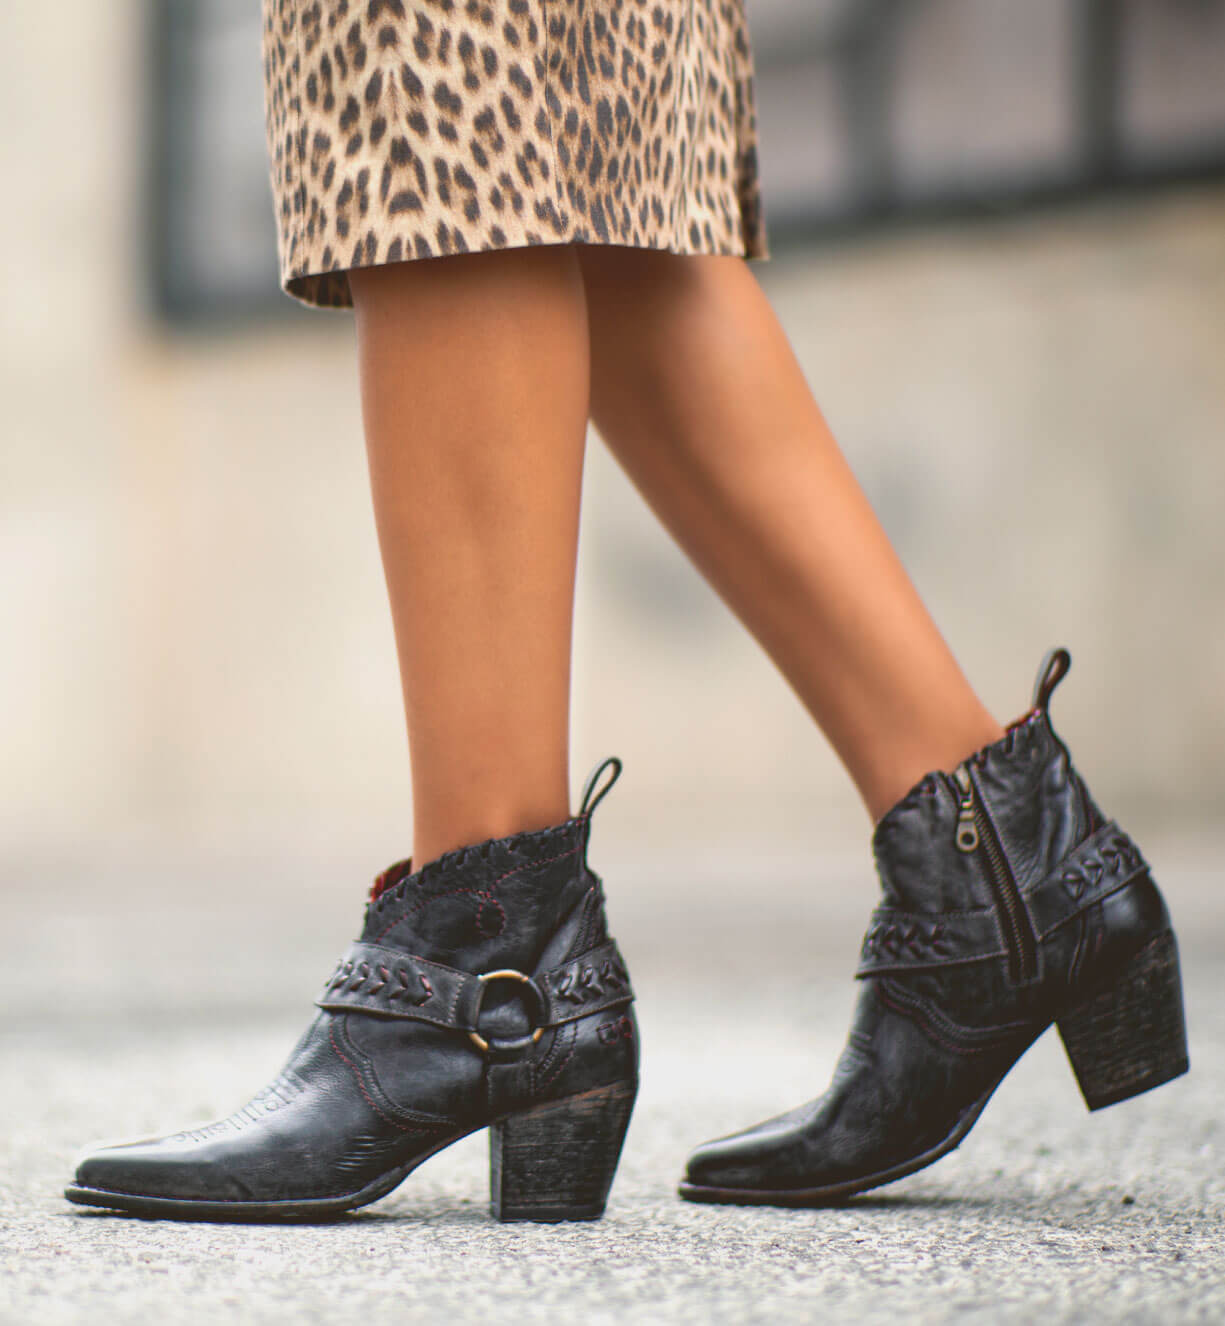 A woman wearing a leopard Tania skirt and black Bed Stu ankle boots.